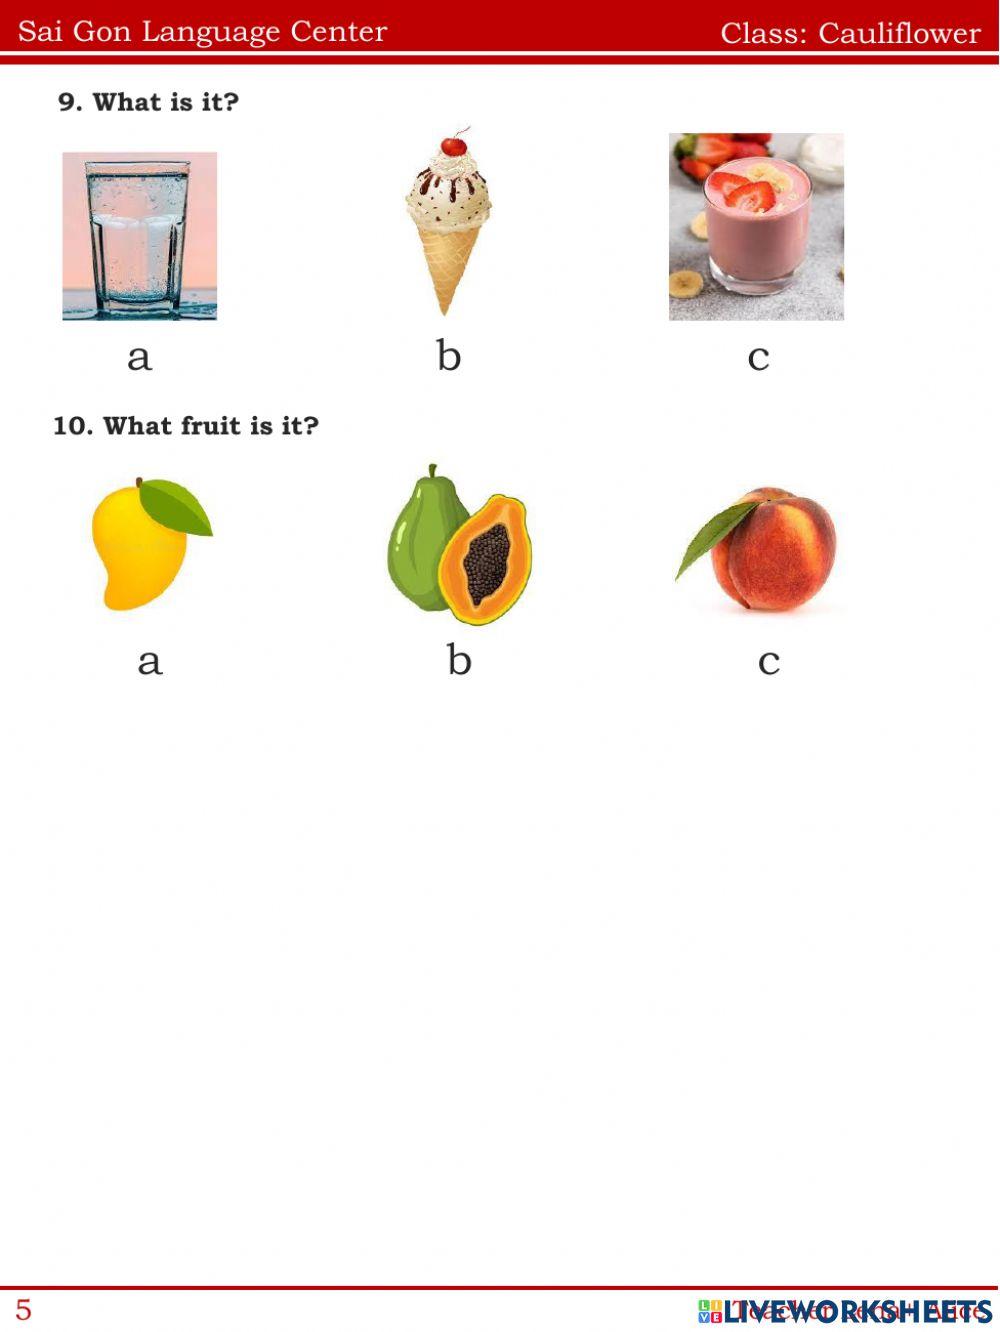 Review fruits